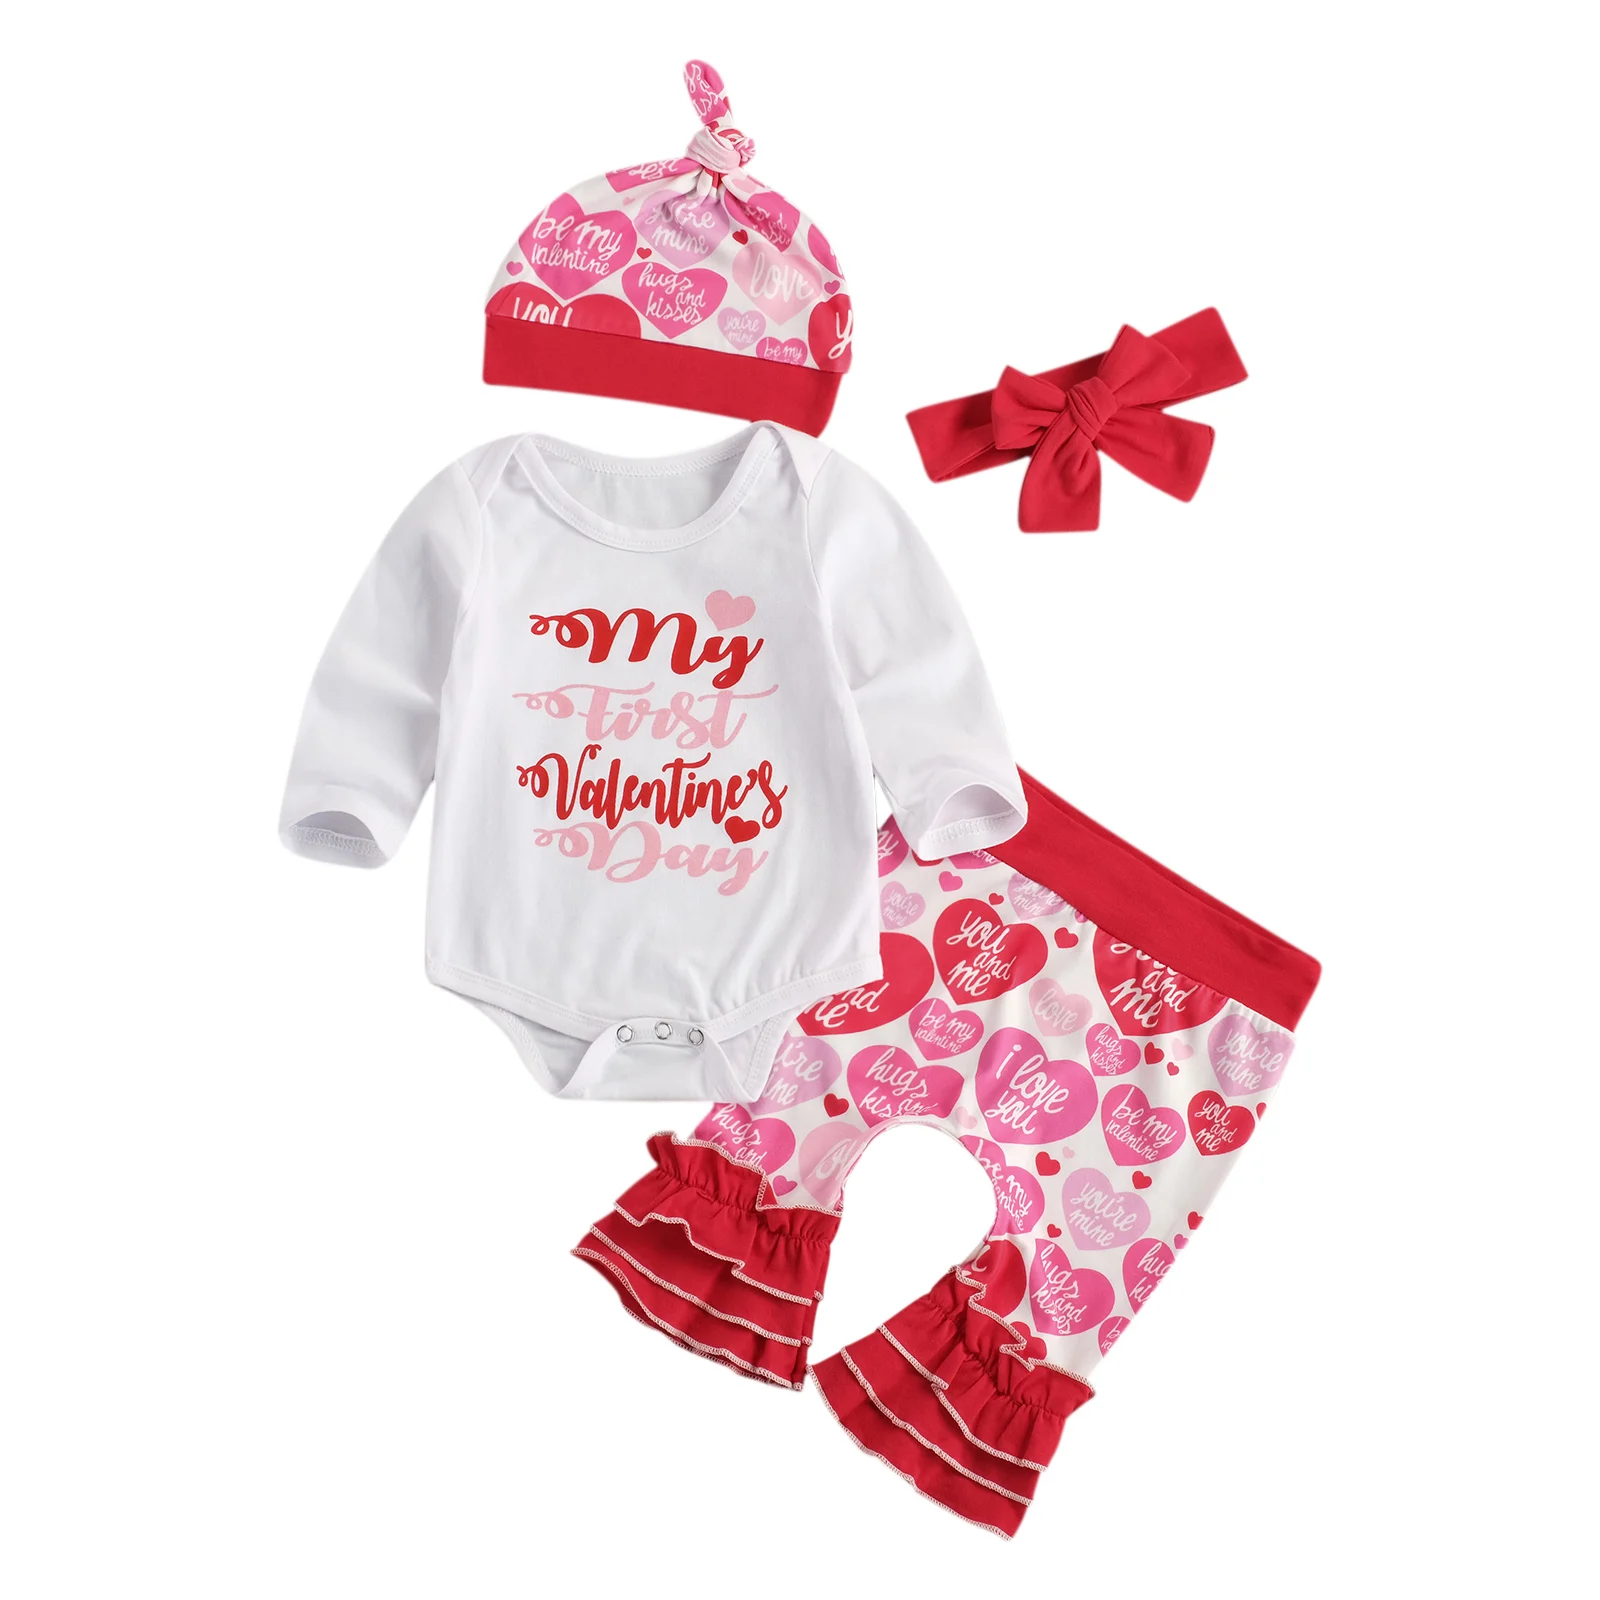 

2020 New Valentine's Day 0-12M Baby Girl 4Pcs Set Outfit Letter Print Long Sleeve Top+Multi Flared Heart Print Trousers+Bow+Hat